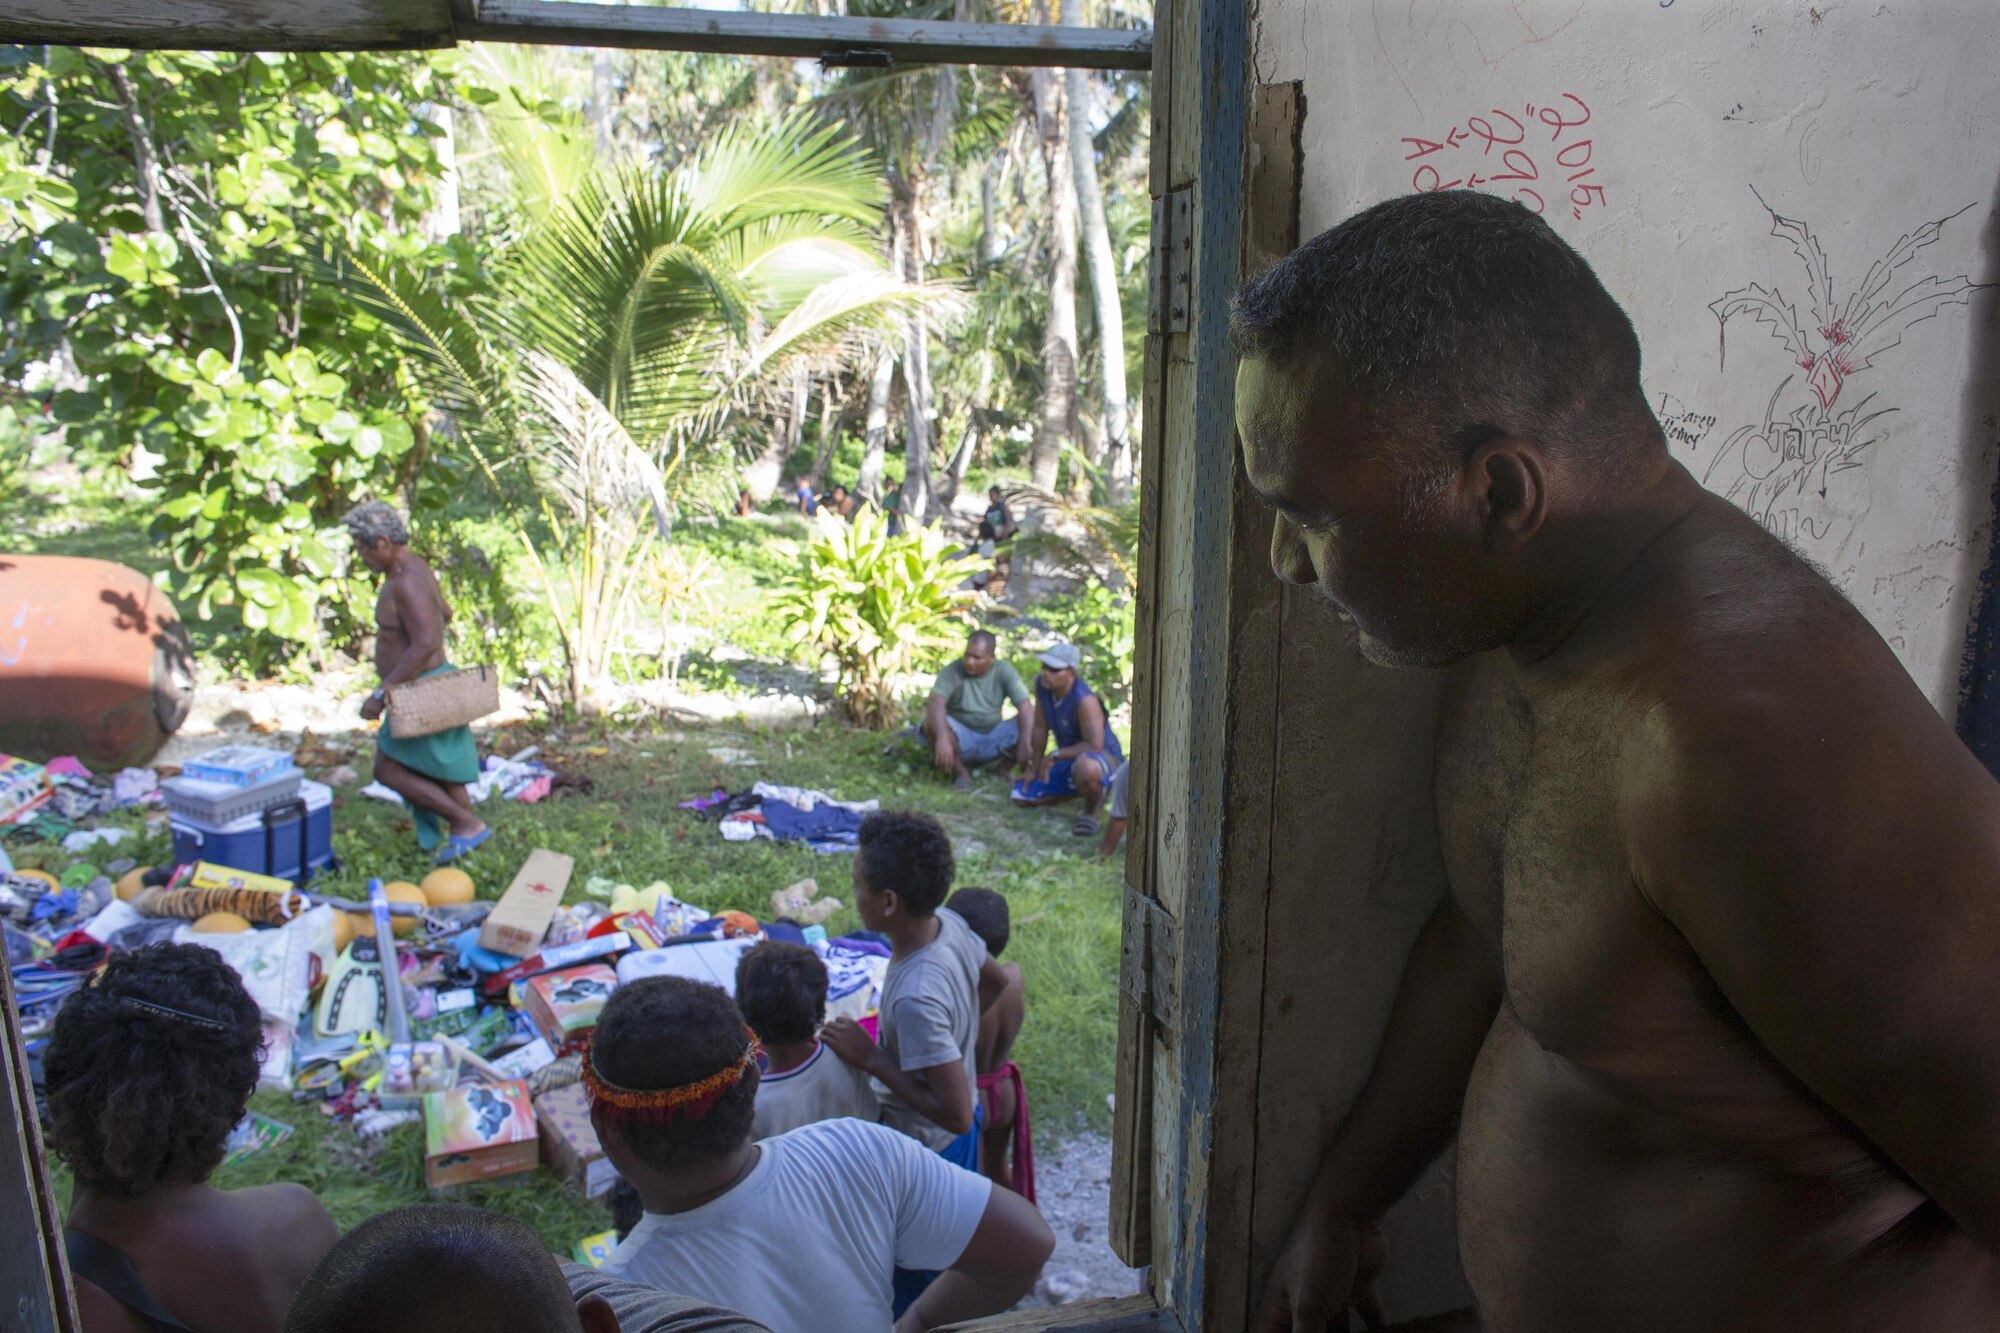 A local villager watches as Louis Mangtau, Chief of Fais Island, sorts through supplies that were dropped during Operation Christmas Drop 2015, Dec. 8, 2015, at Fais Island, Federated States of Micronesia. Operation Christmas Drop is a humanitarian/disaster relief training event where C-130 crews provide critical supplies to 56 islands throughout the Commonwealth of the Northern Marianas, Federated States of Micronesia and Republic of Palau.This year marks the first ever trilateral execution that includes air support from the U.S. Air Force, Japan Air Self-Defense Force and the Royal Australian Air Force. (U.S. Air Force photo by Osakabe Yasuo/Released)